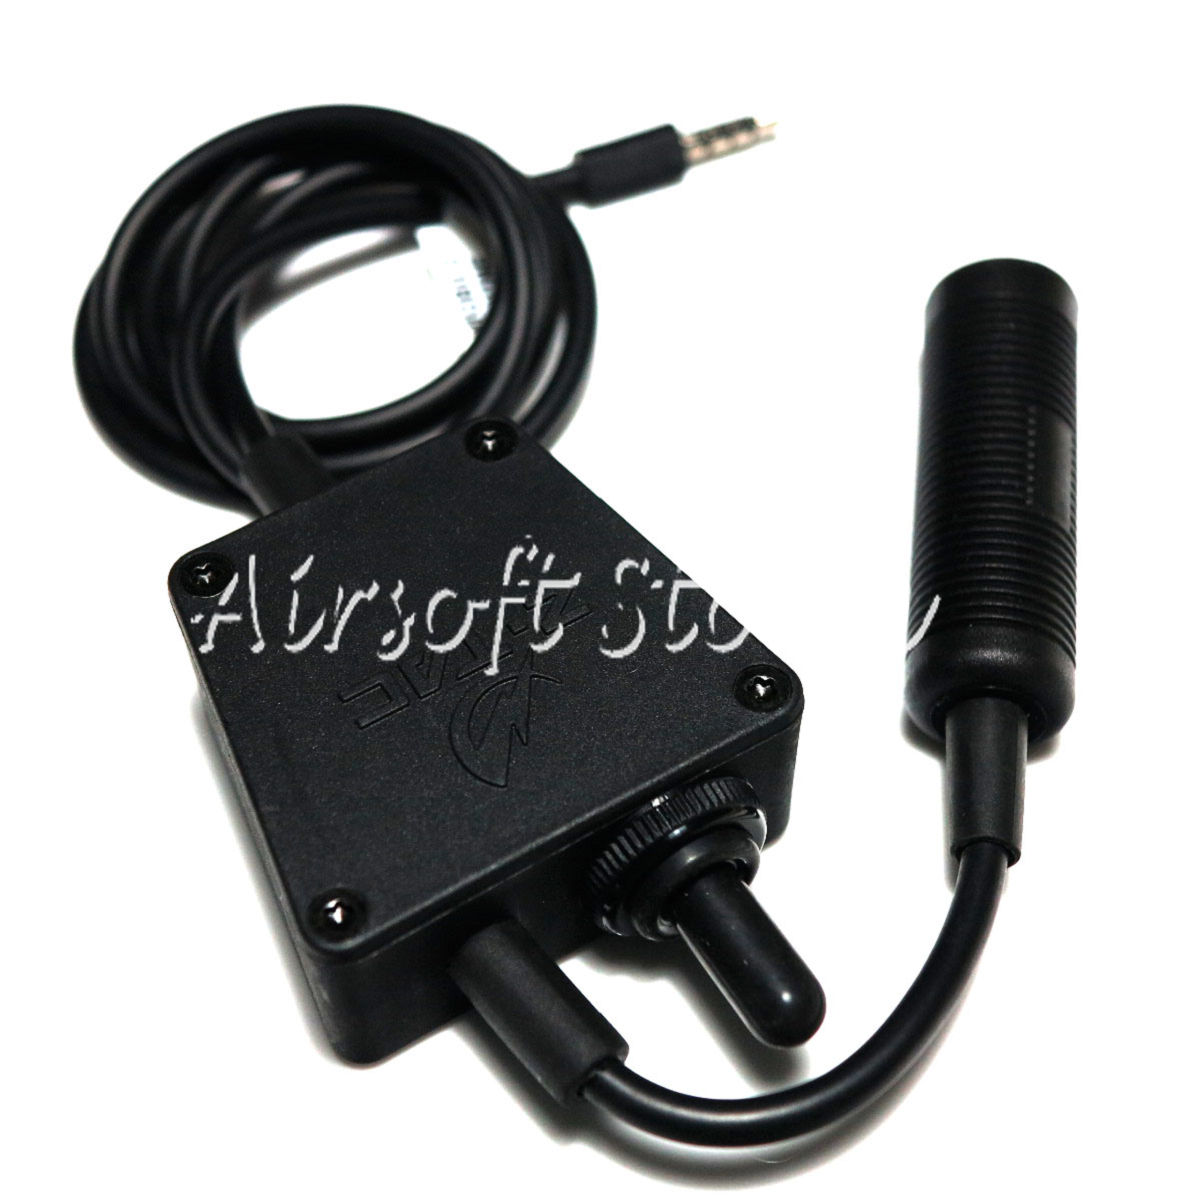 Airsoft SWAT Communications Gear Z Tactical E-Switch Headset PTT for Mobile Phone 3.5mm Version